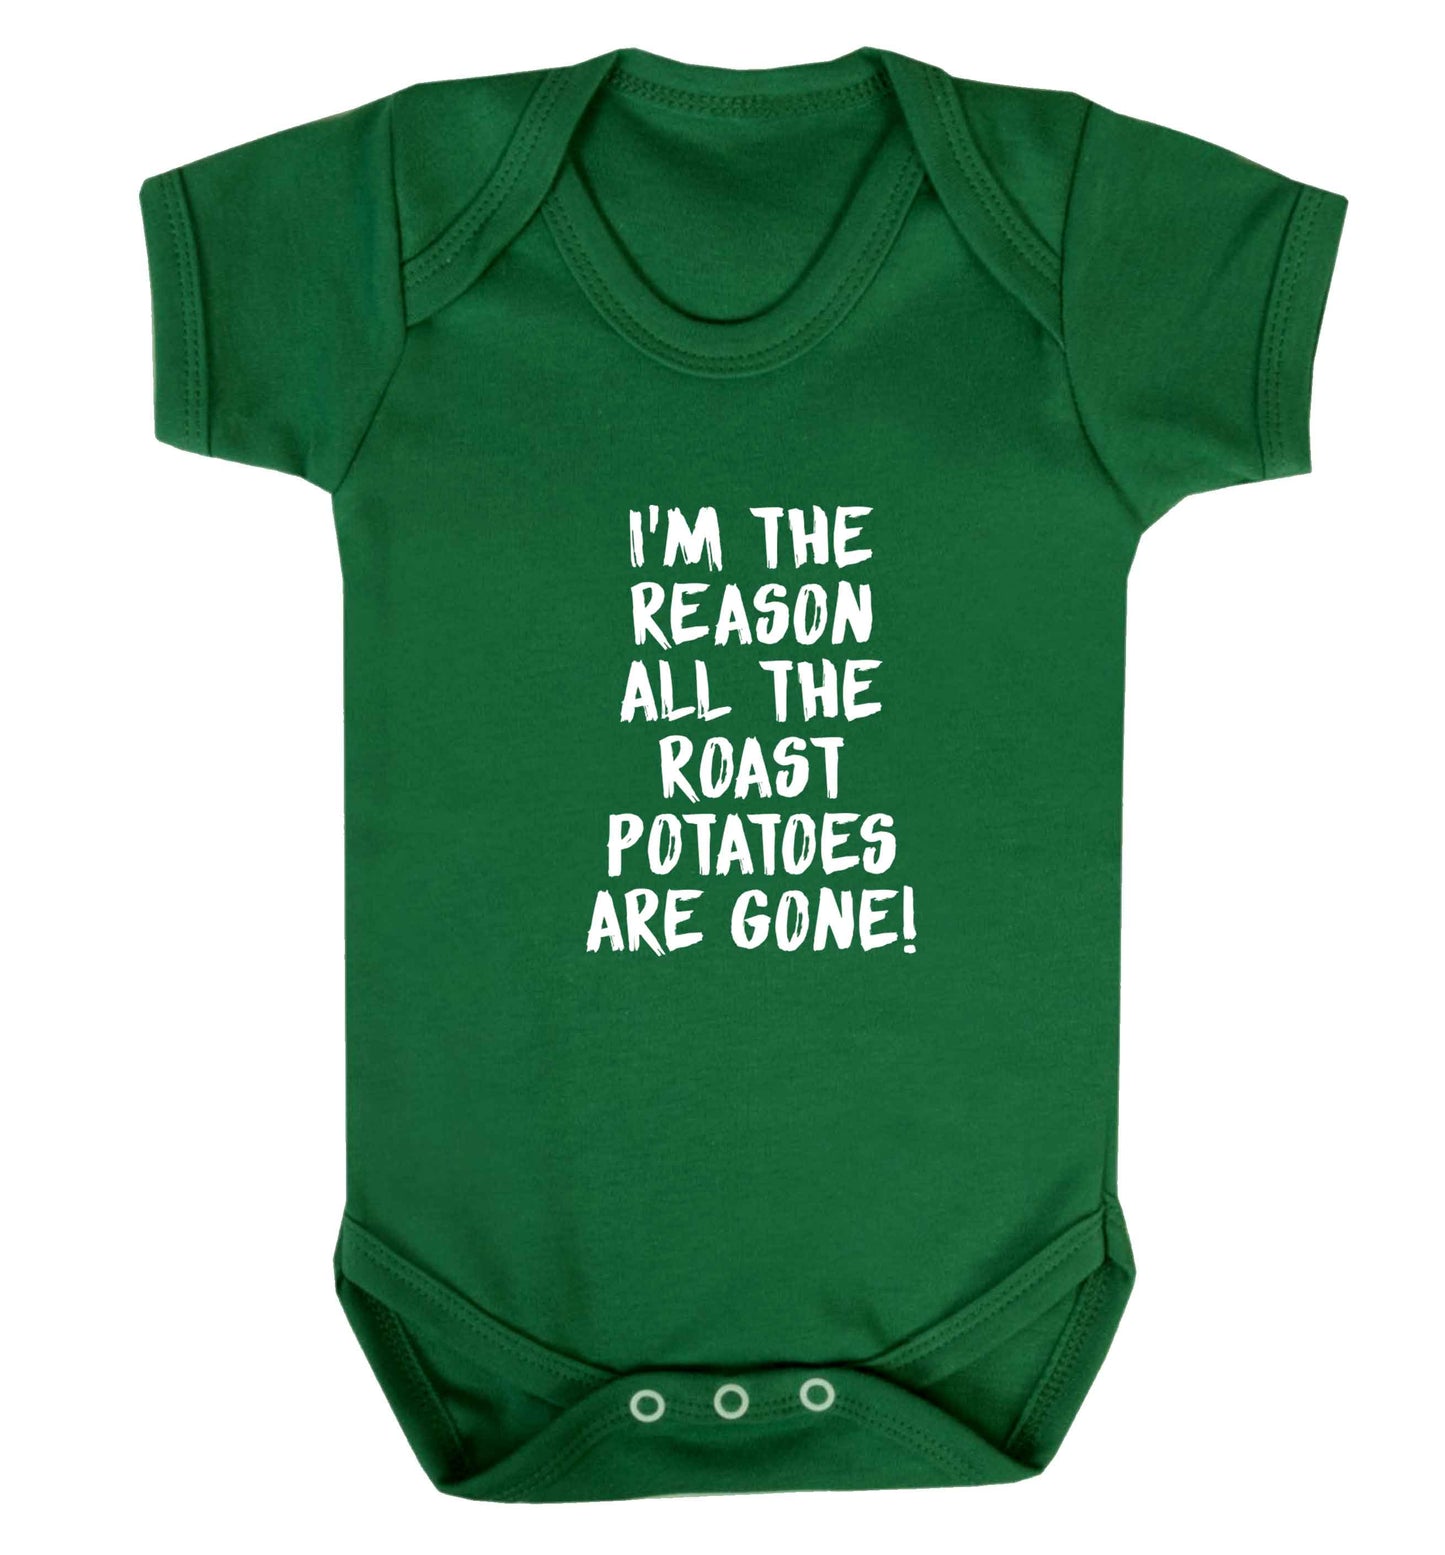 I'm the reason all the roast potatoes are gone baby vest green 18-24 months